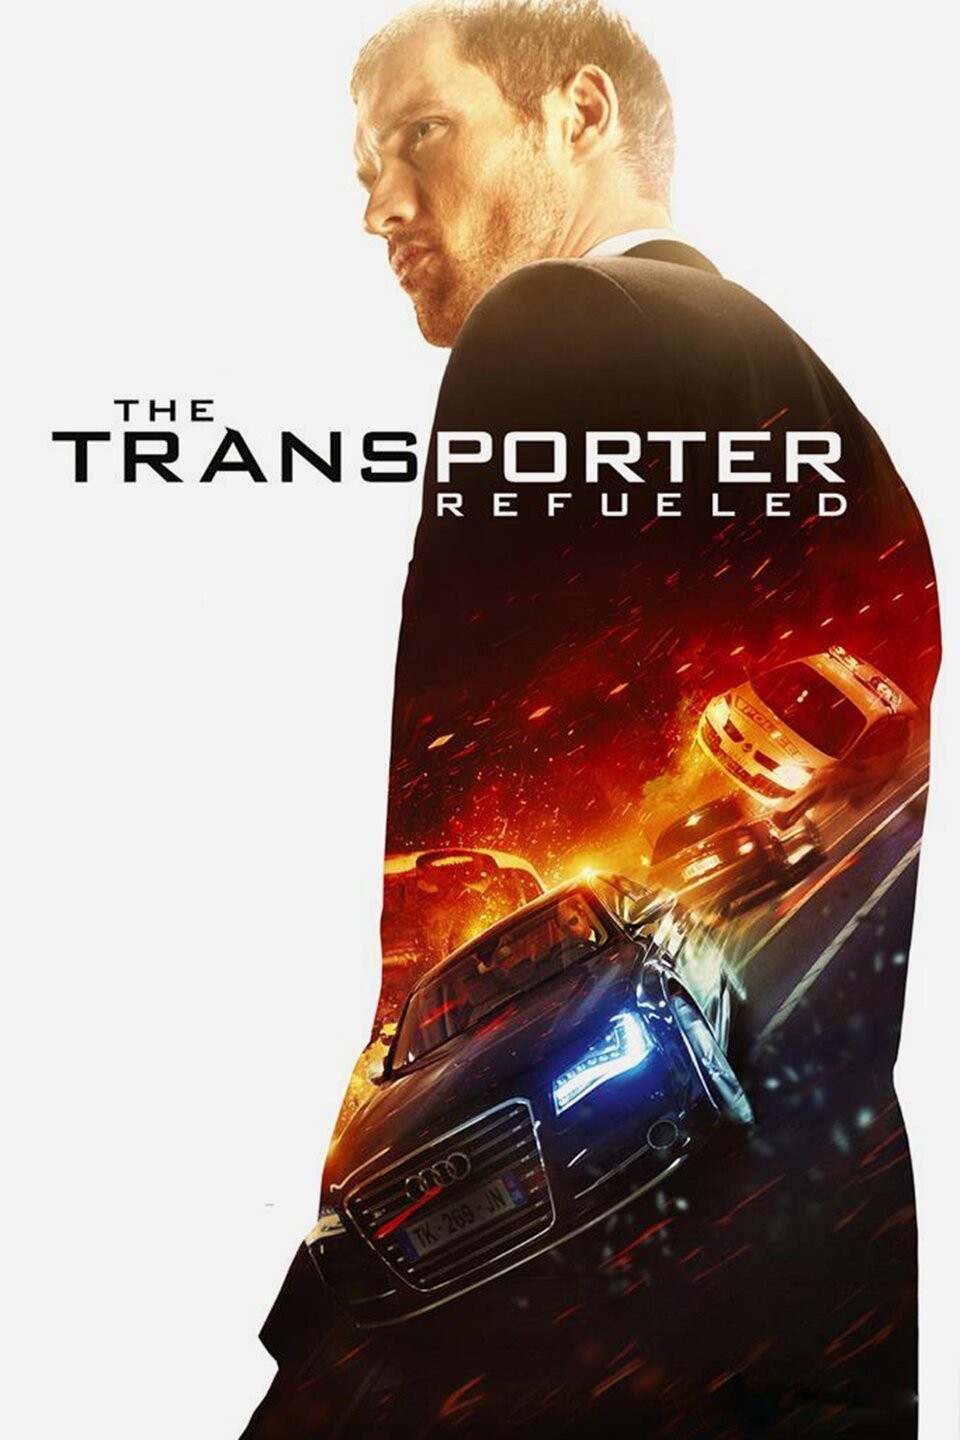 My Thoughts on: The Transporter (2002)